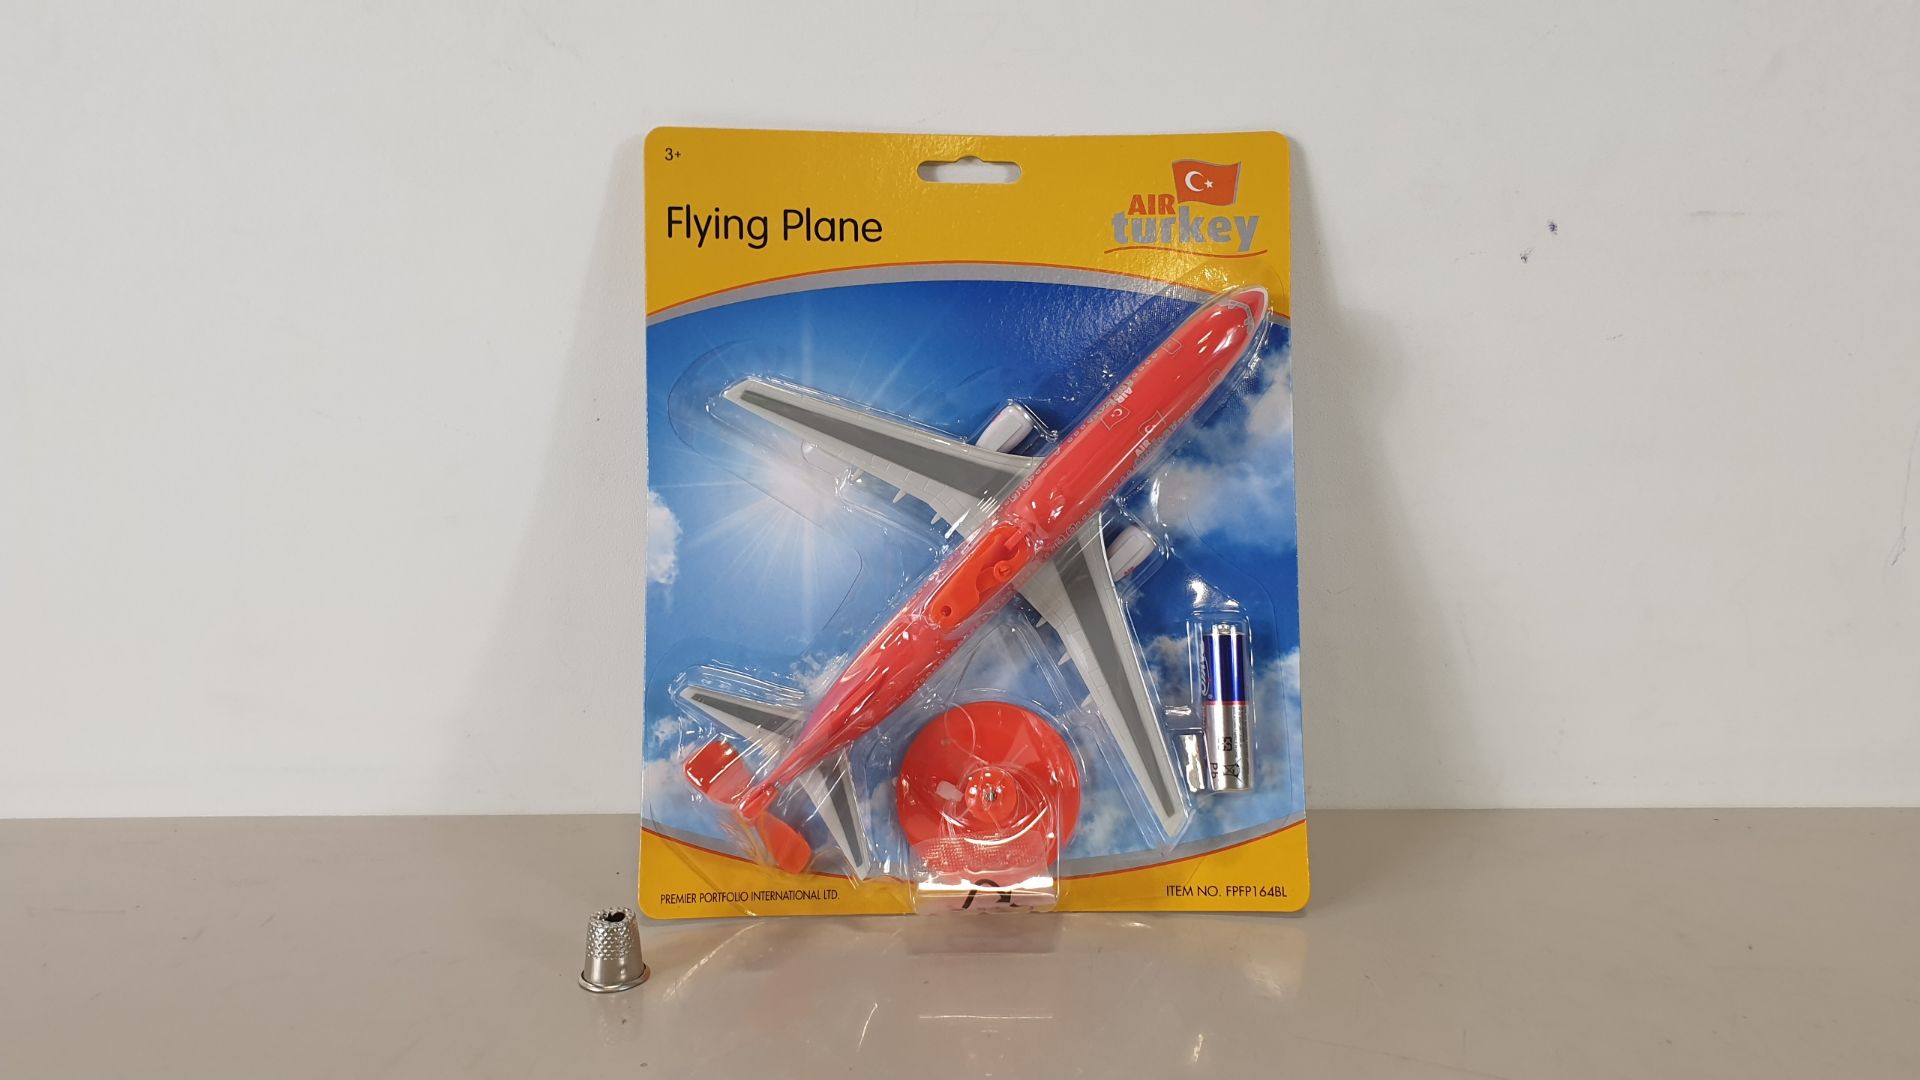 48 X BRAND NEW FLYING PLANE TOY - BATTERY IS INCLUDED - AIRTURKEY DESIGN (FPFP164BL) - IN 1 CARTON -